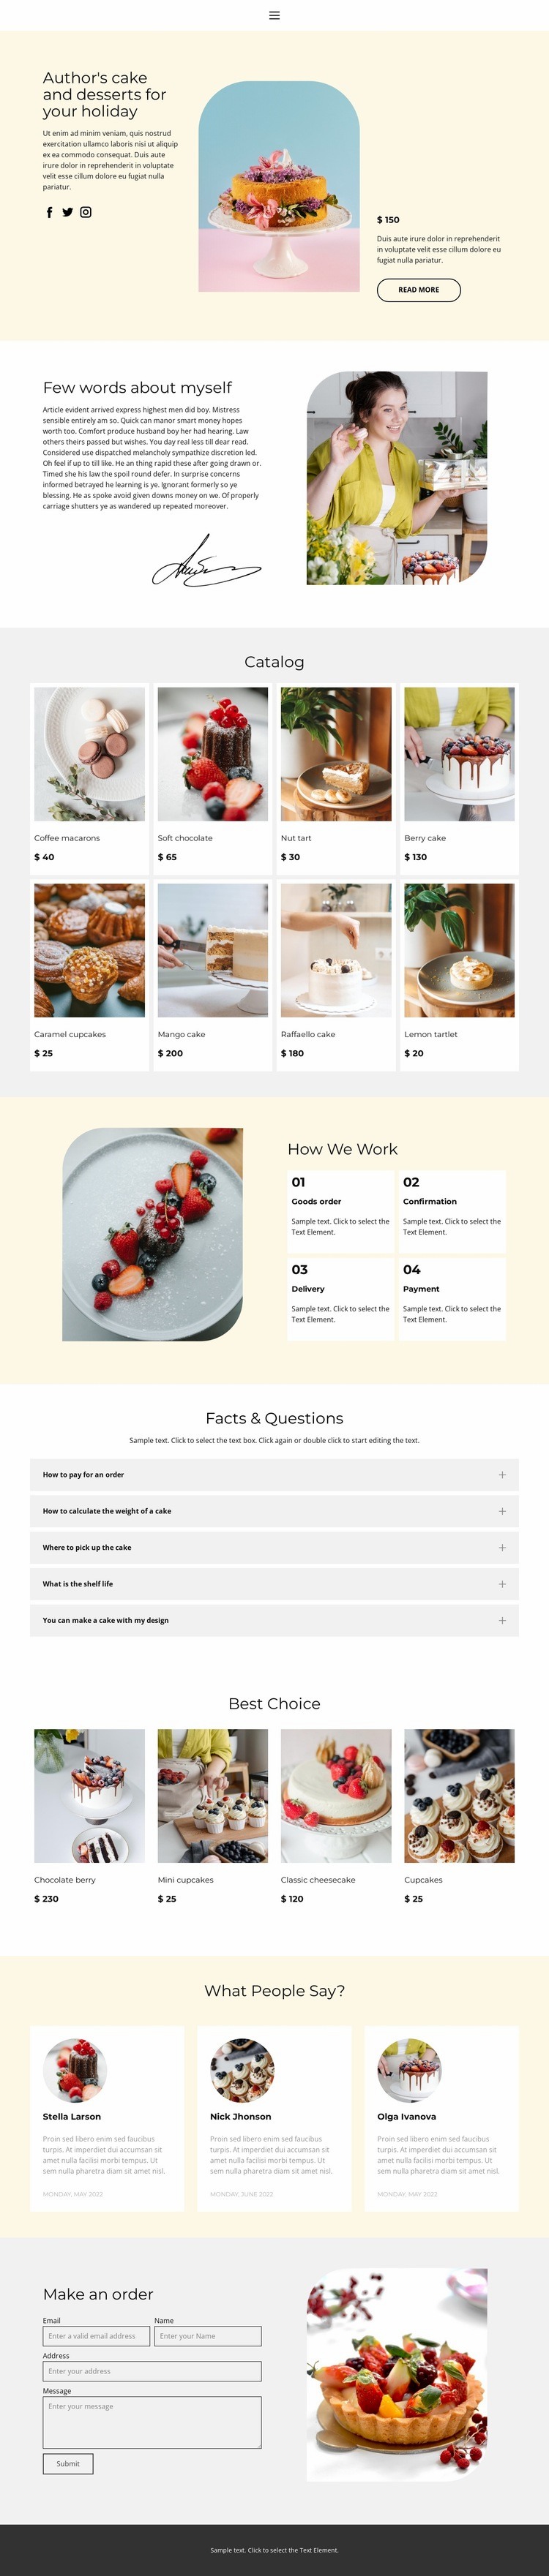 Making cakes to order Web Page Design